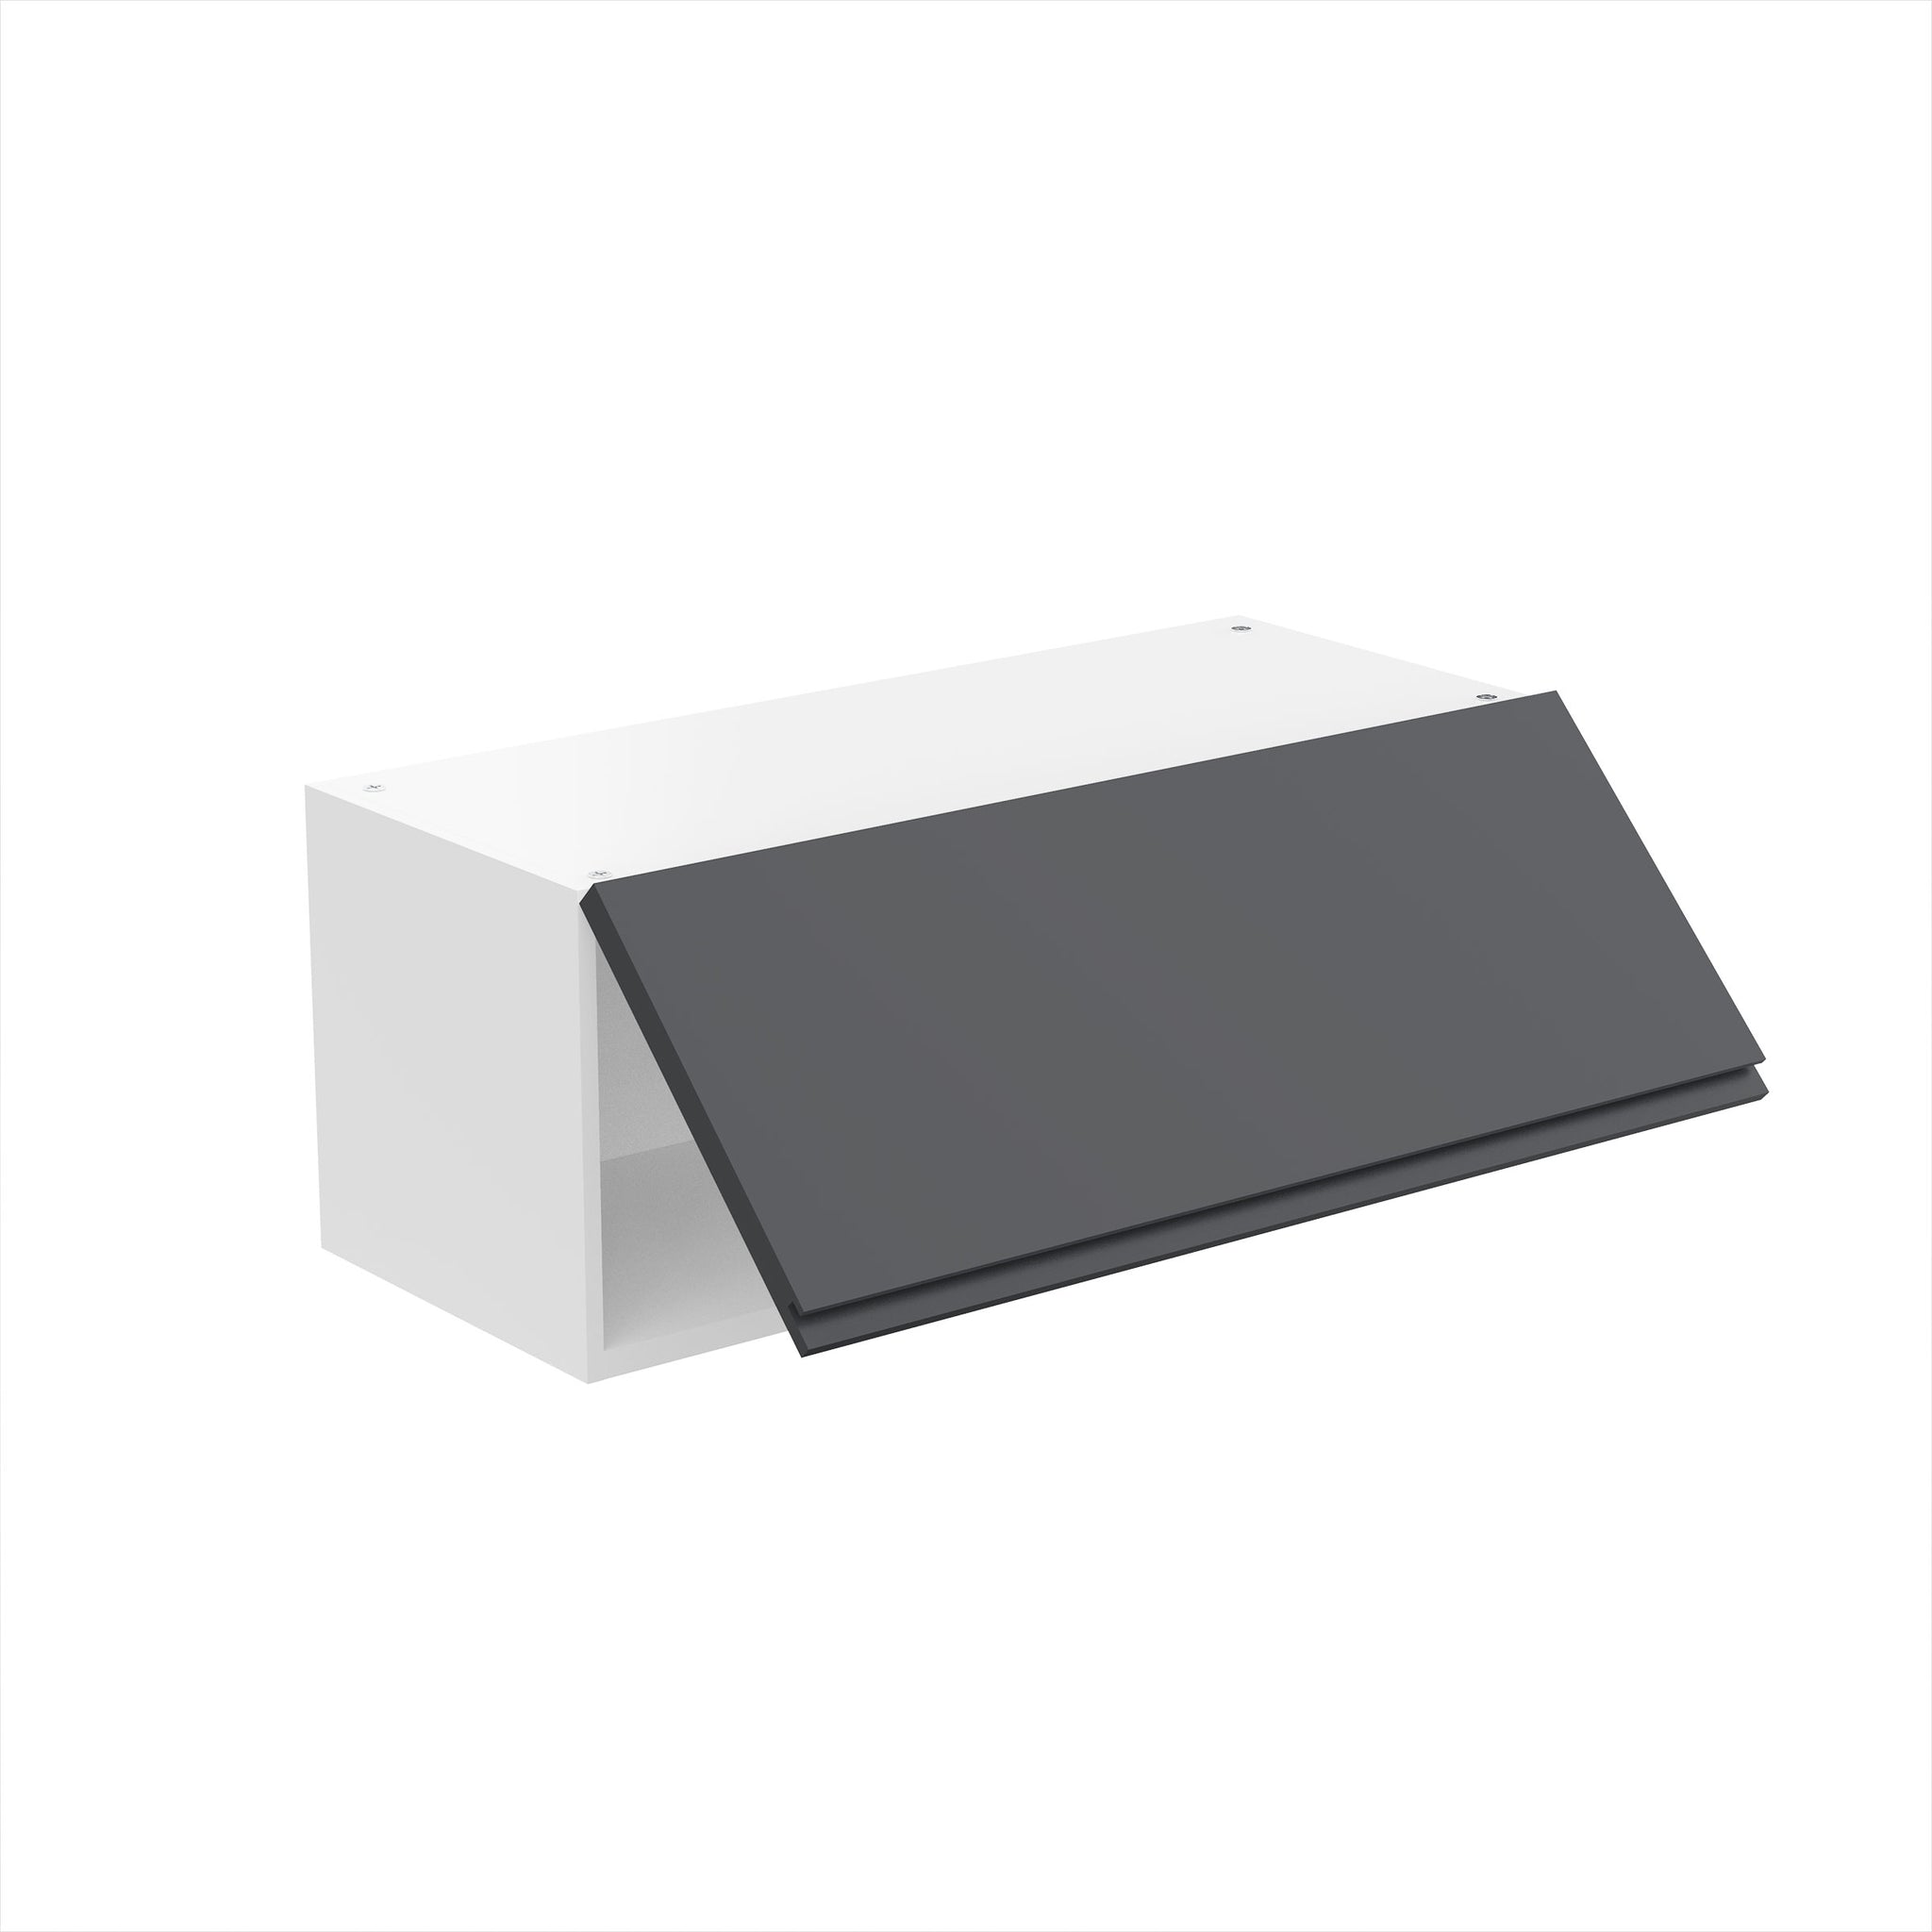 RTA - Lacquer Grey - Horizontal Door Wall Cabinets | 30"W x 12"H x 12"D